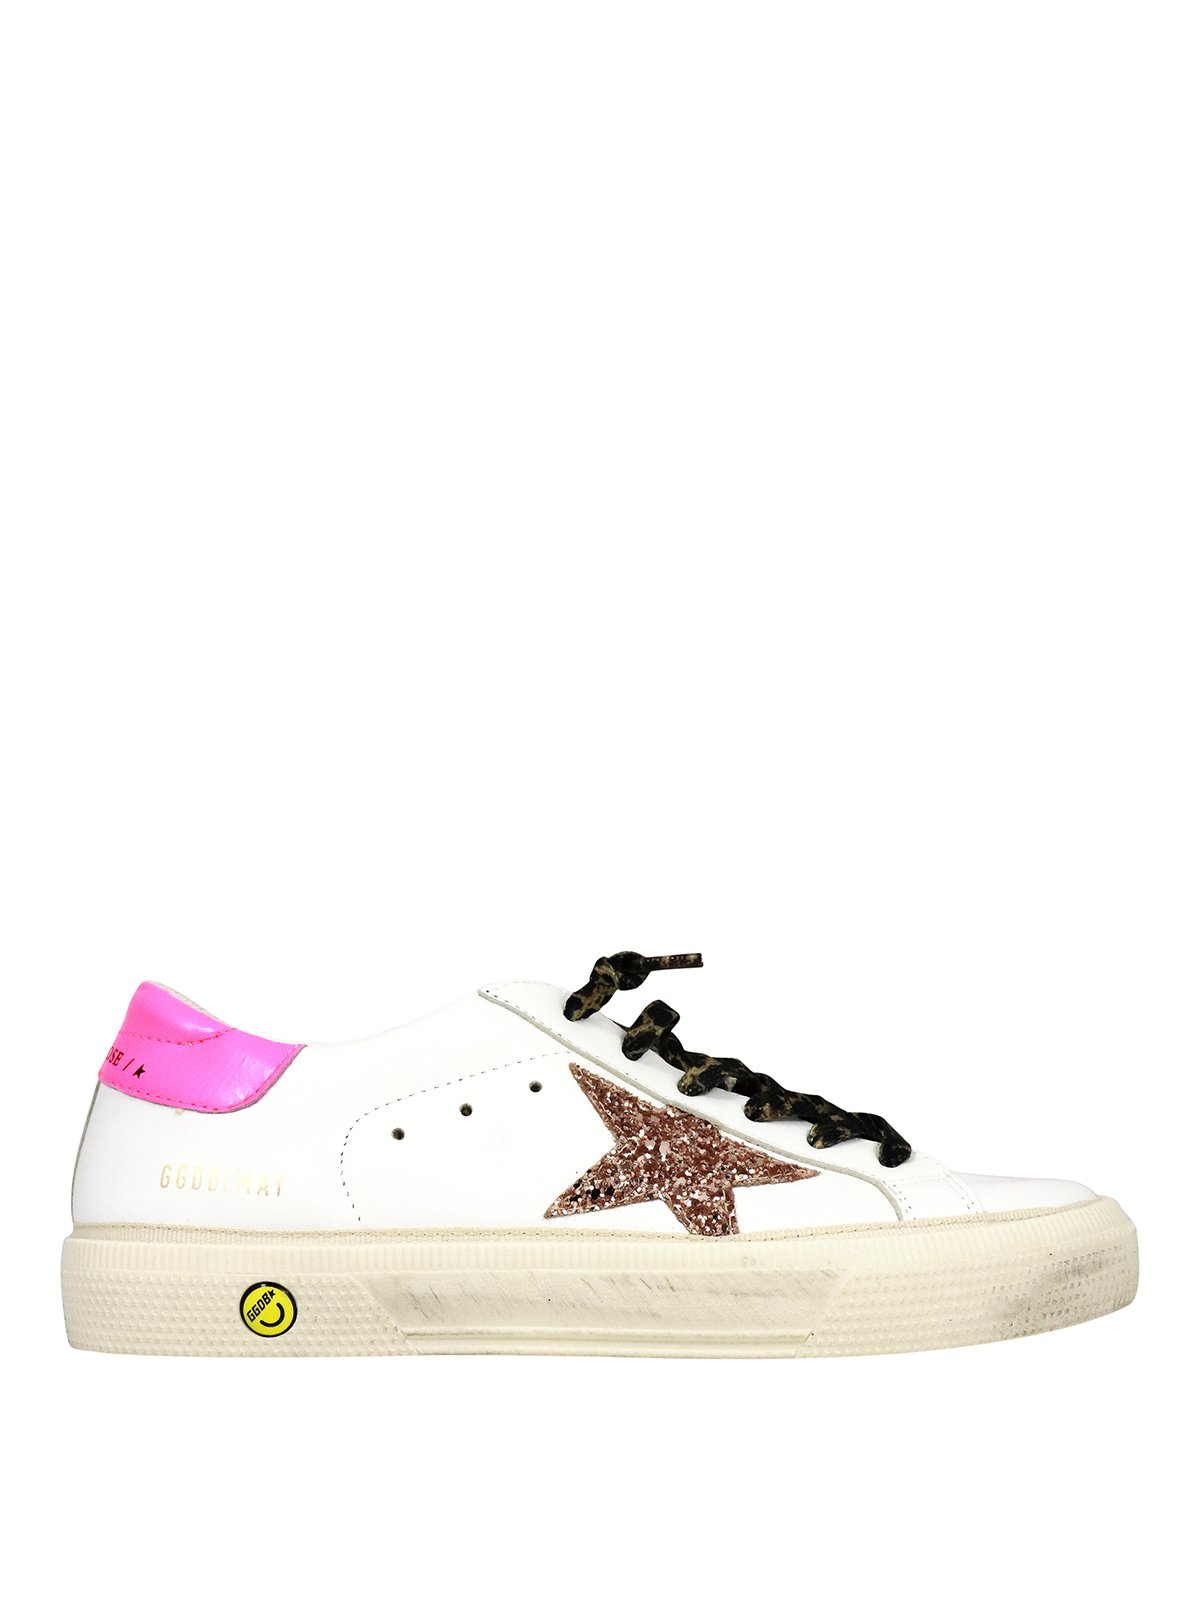 Golden Goose Kids' May Sneakers In White